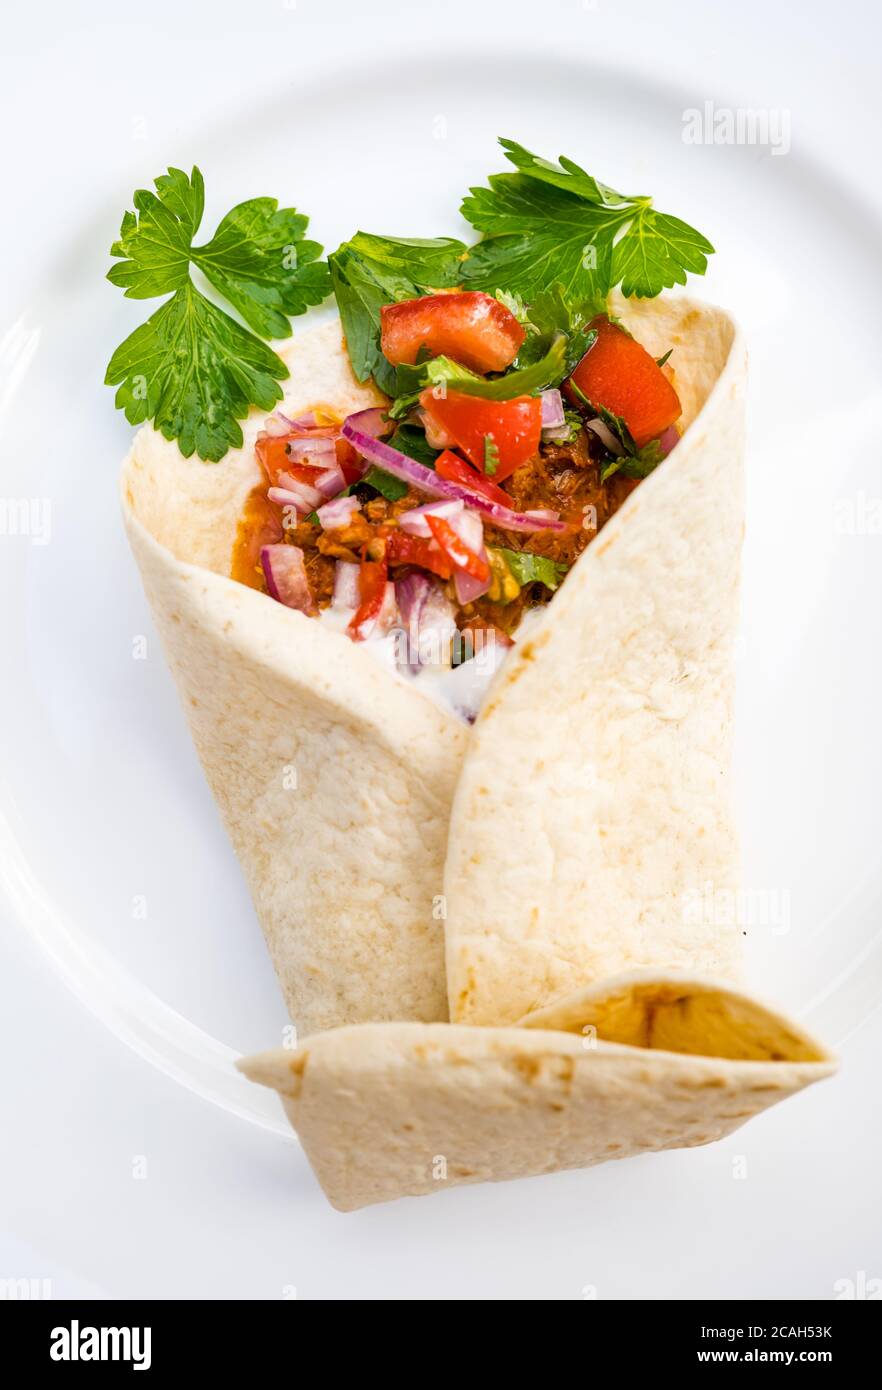 Close up of Mexican tortilla wrap filled with pulled pork, tomato salsa and sour cream with coriander on white dinner plate Stock Photo